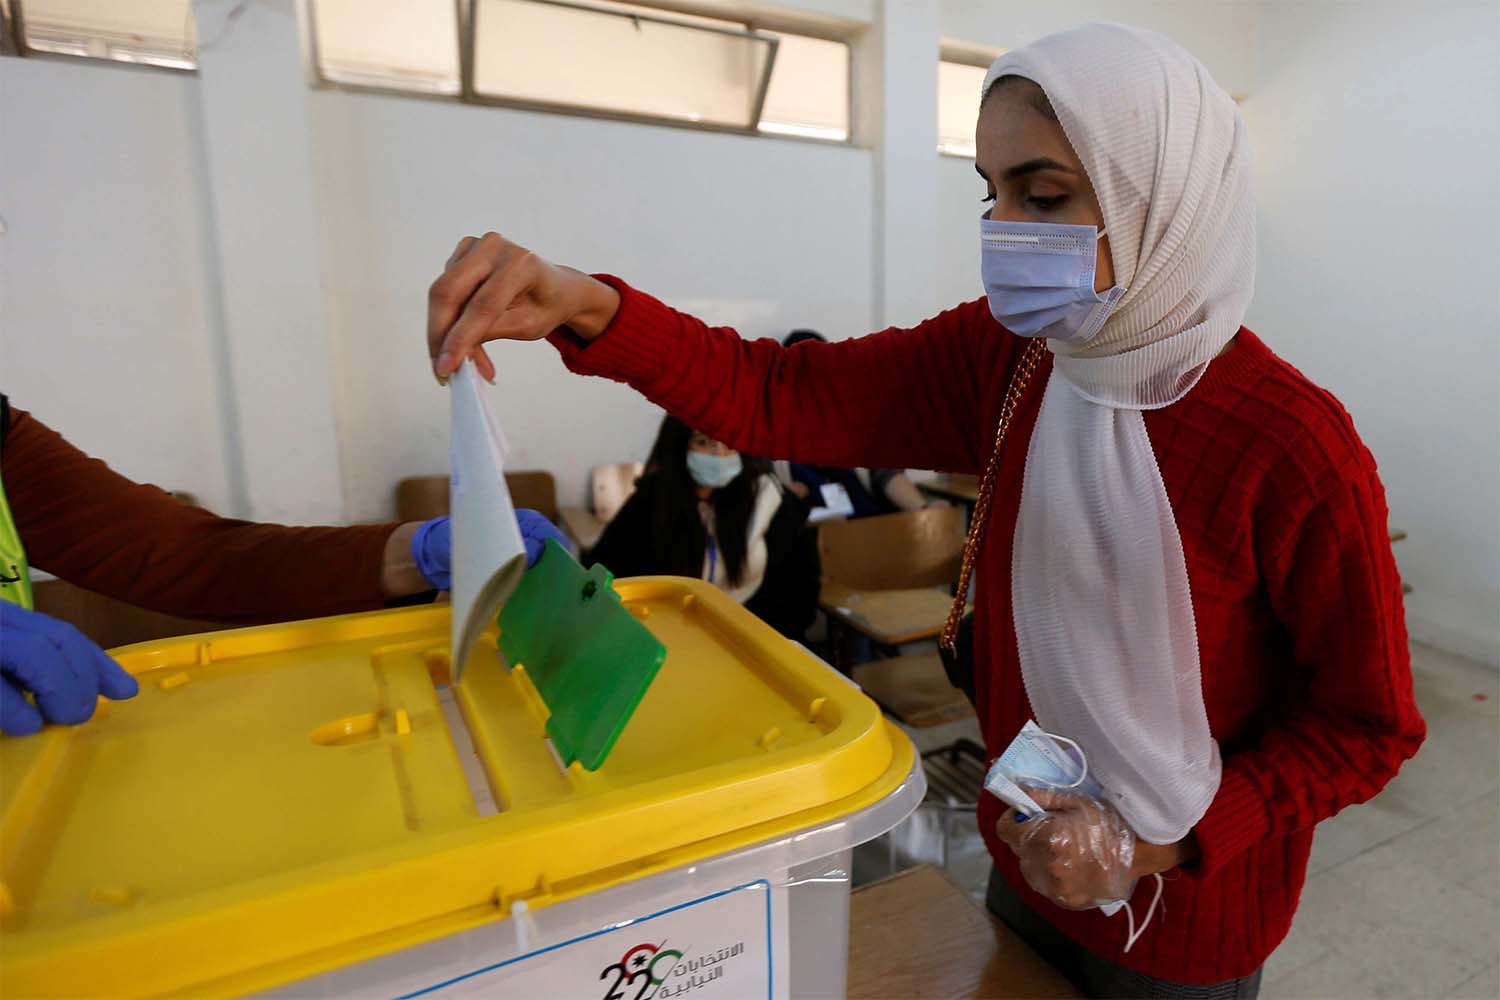 Politicians appealed to Jordanians to turn out and vote amid widespread apathy and calls for a boycott